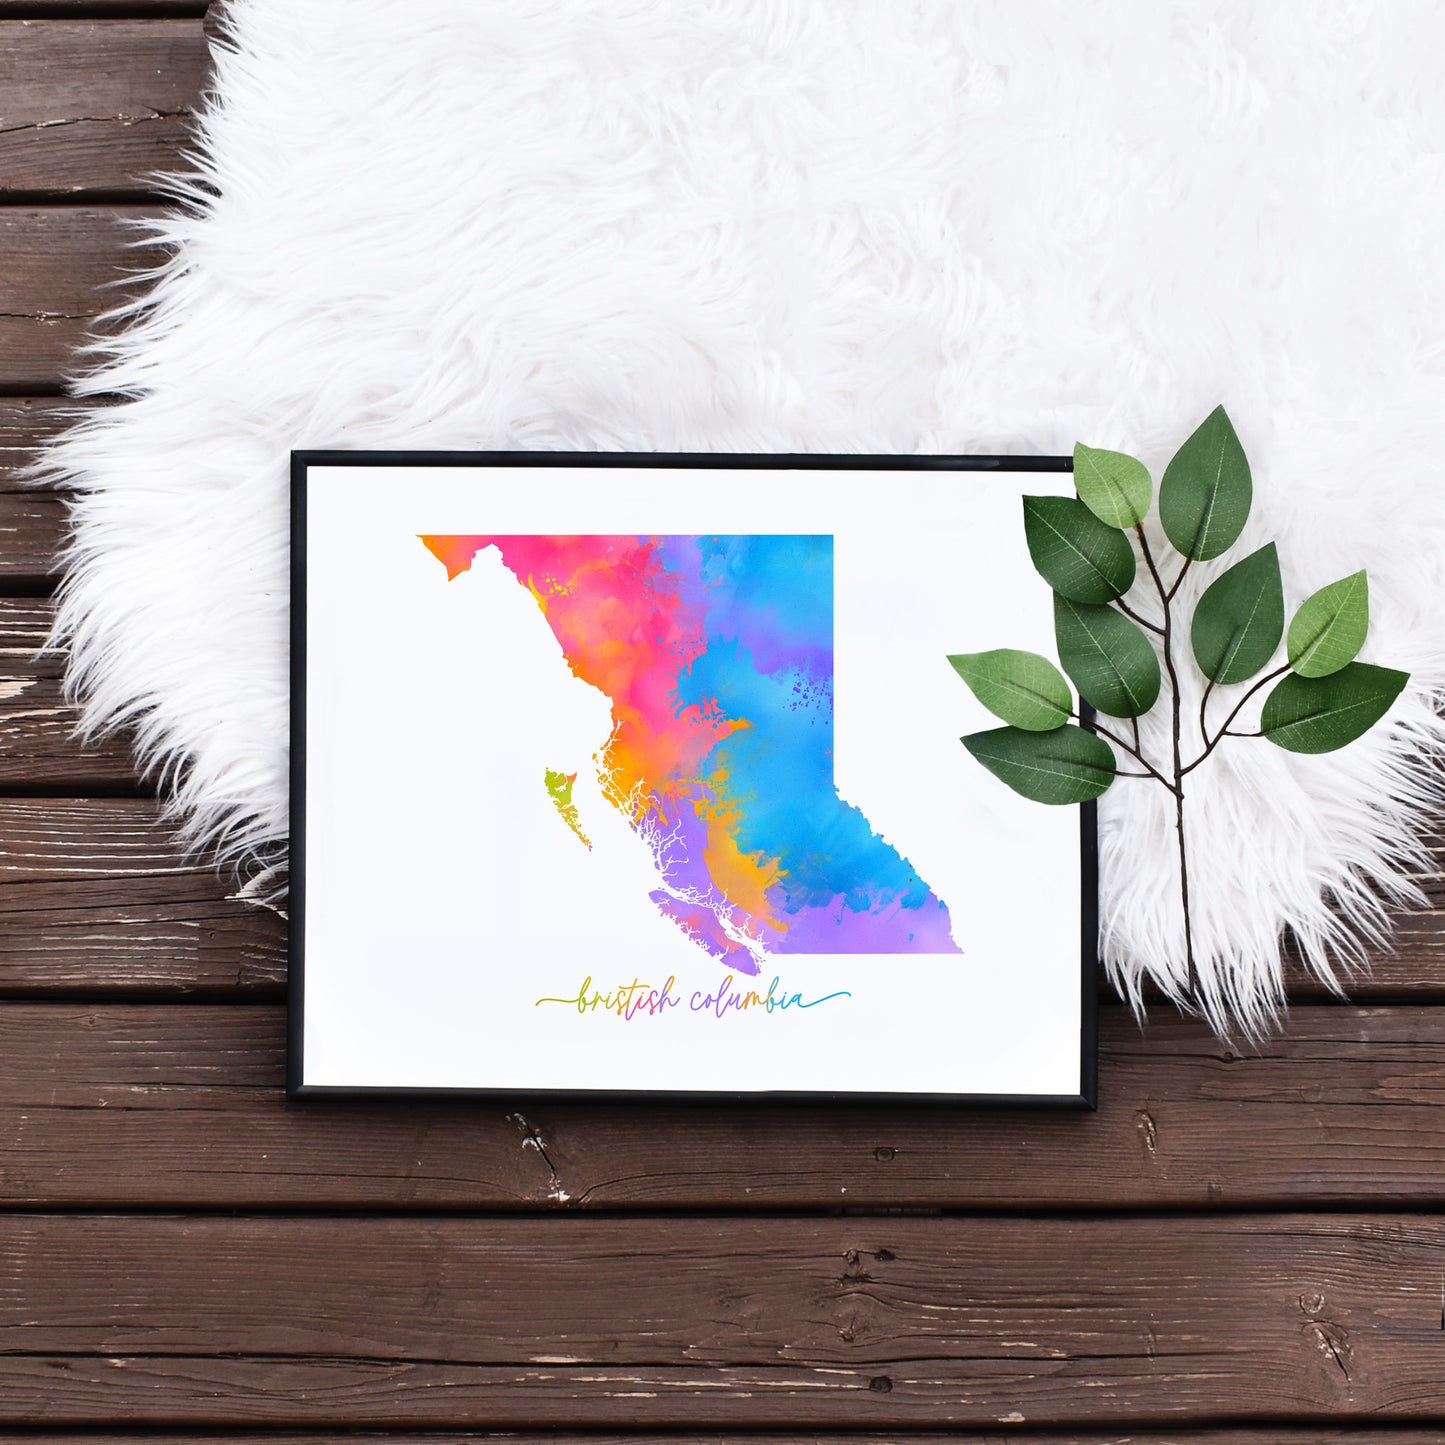 Easy Printable British Columbia Map Poster Home Office Decor